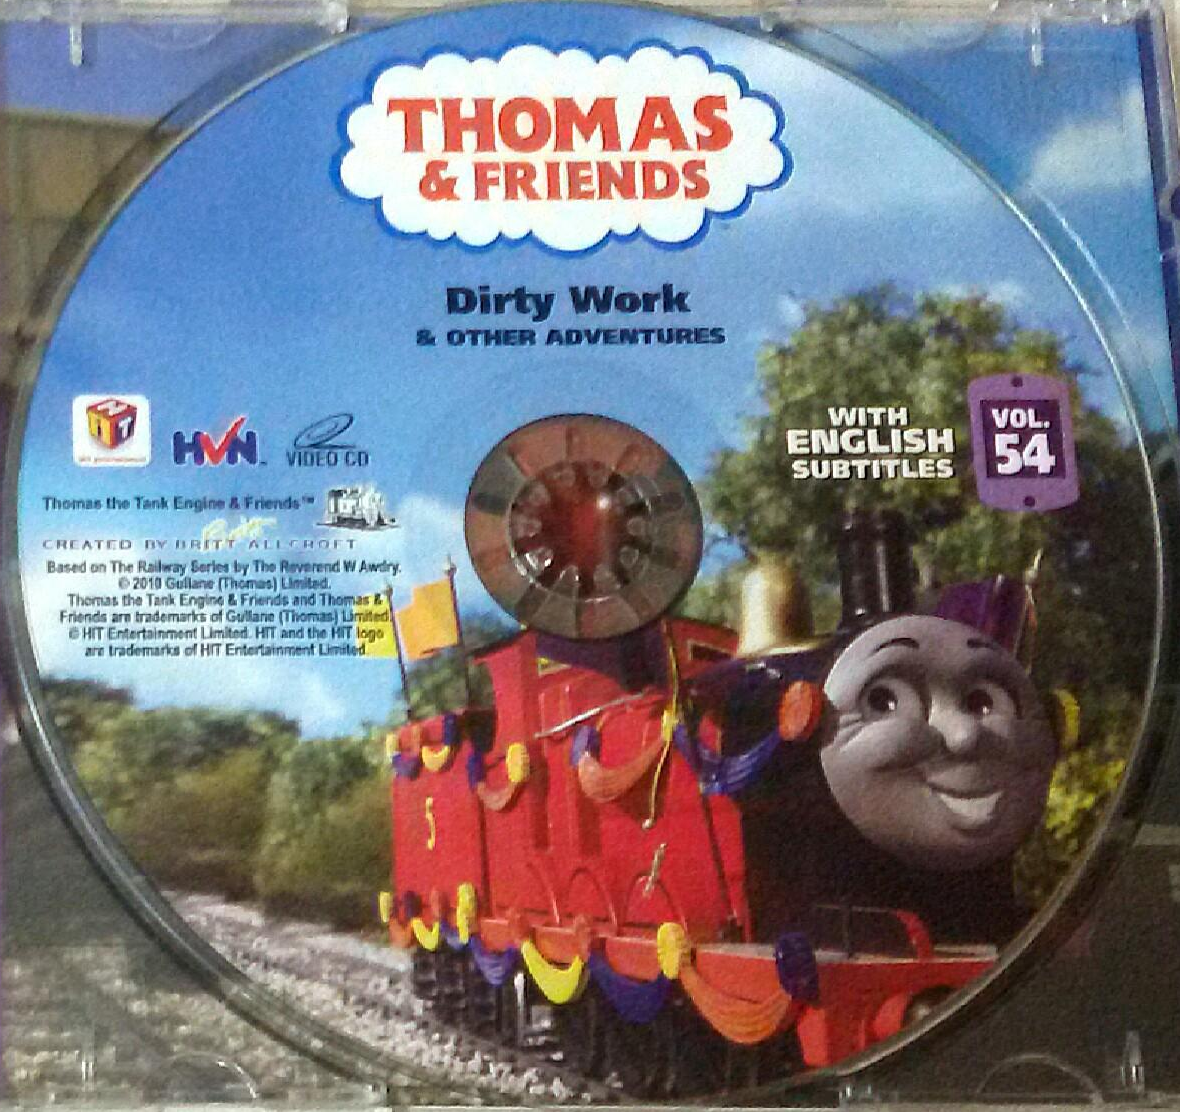 Dirty Work and Other Adventures | Thomas the Tank Engine Wikia 